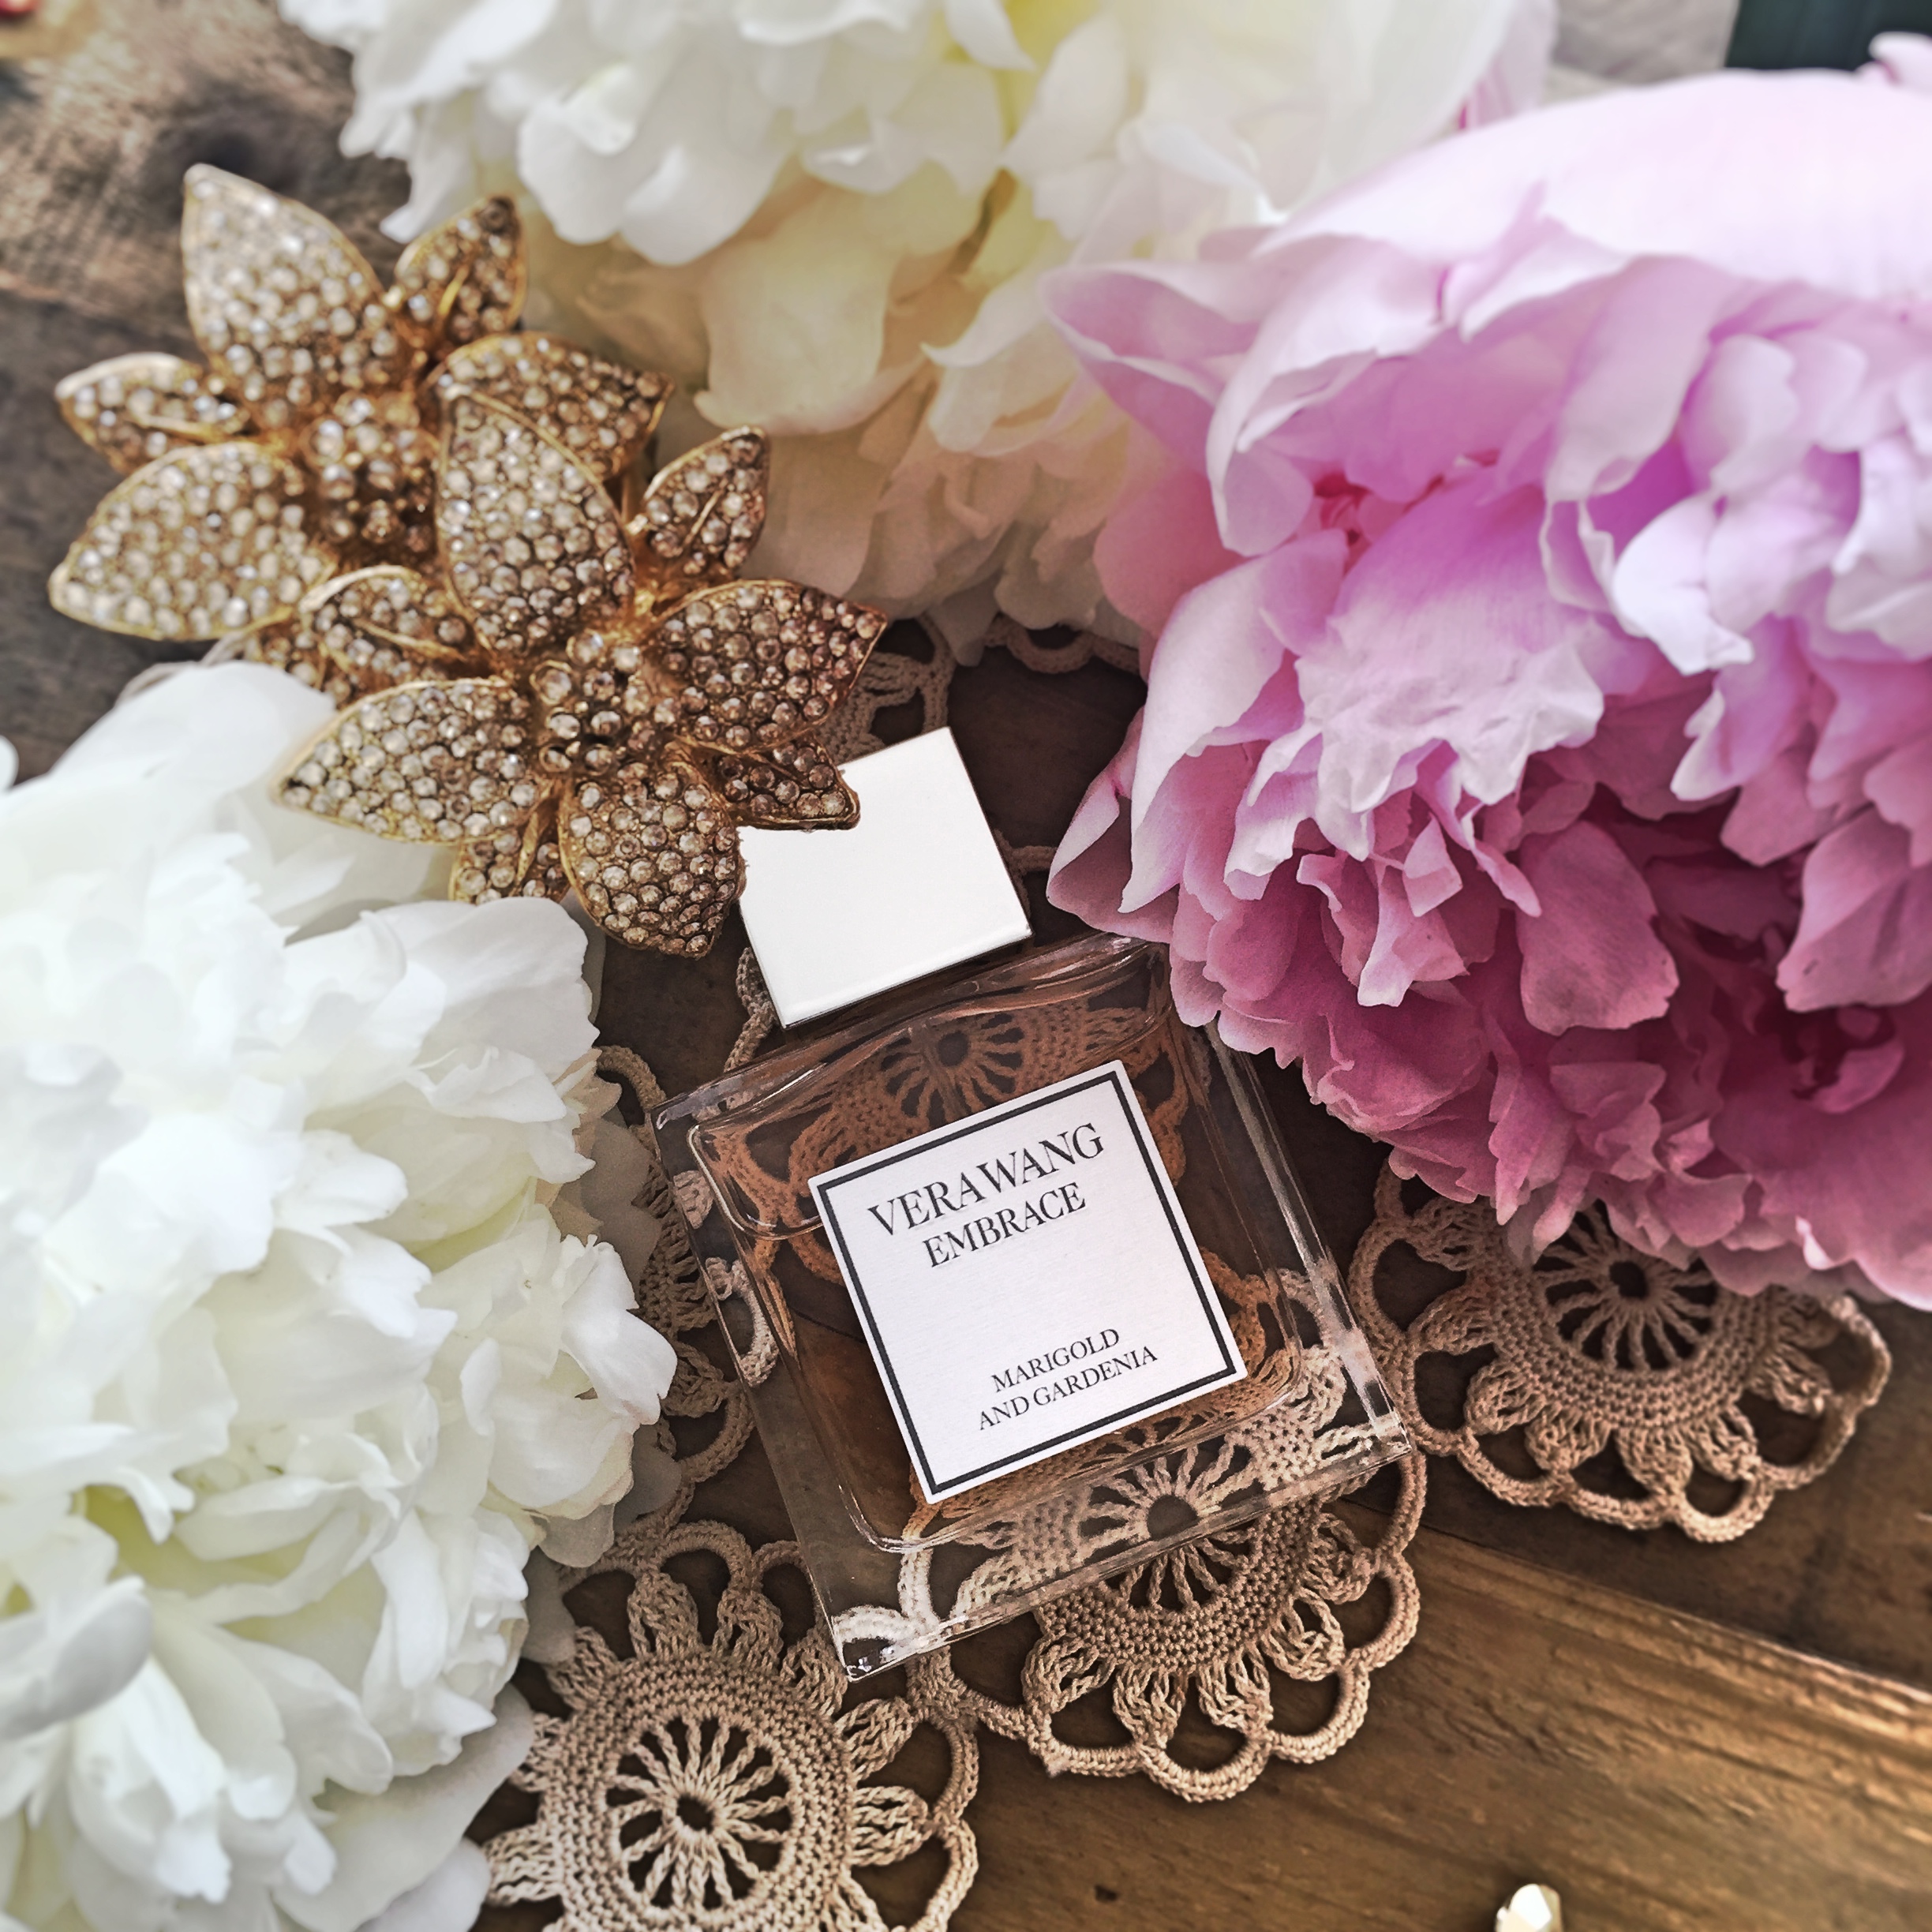 The newest fragrance in the Vera Wang Embrace Collection, Marigold and Gardenia, draws inspiration from intimacy celebrating moments in time to be cherished and embraced. 